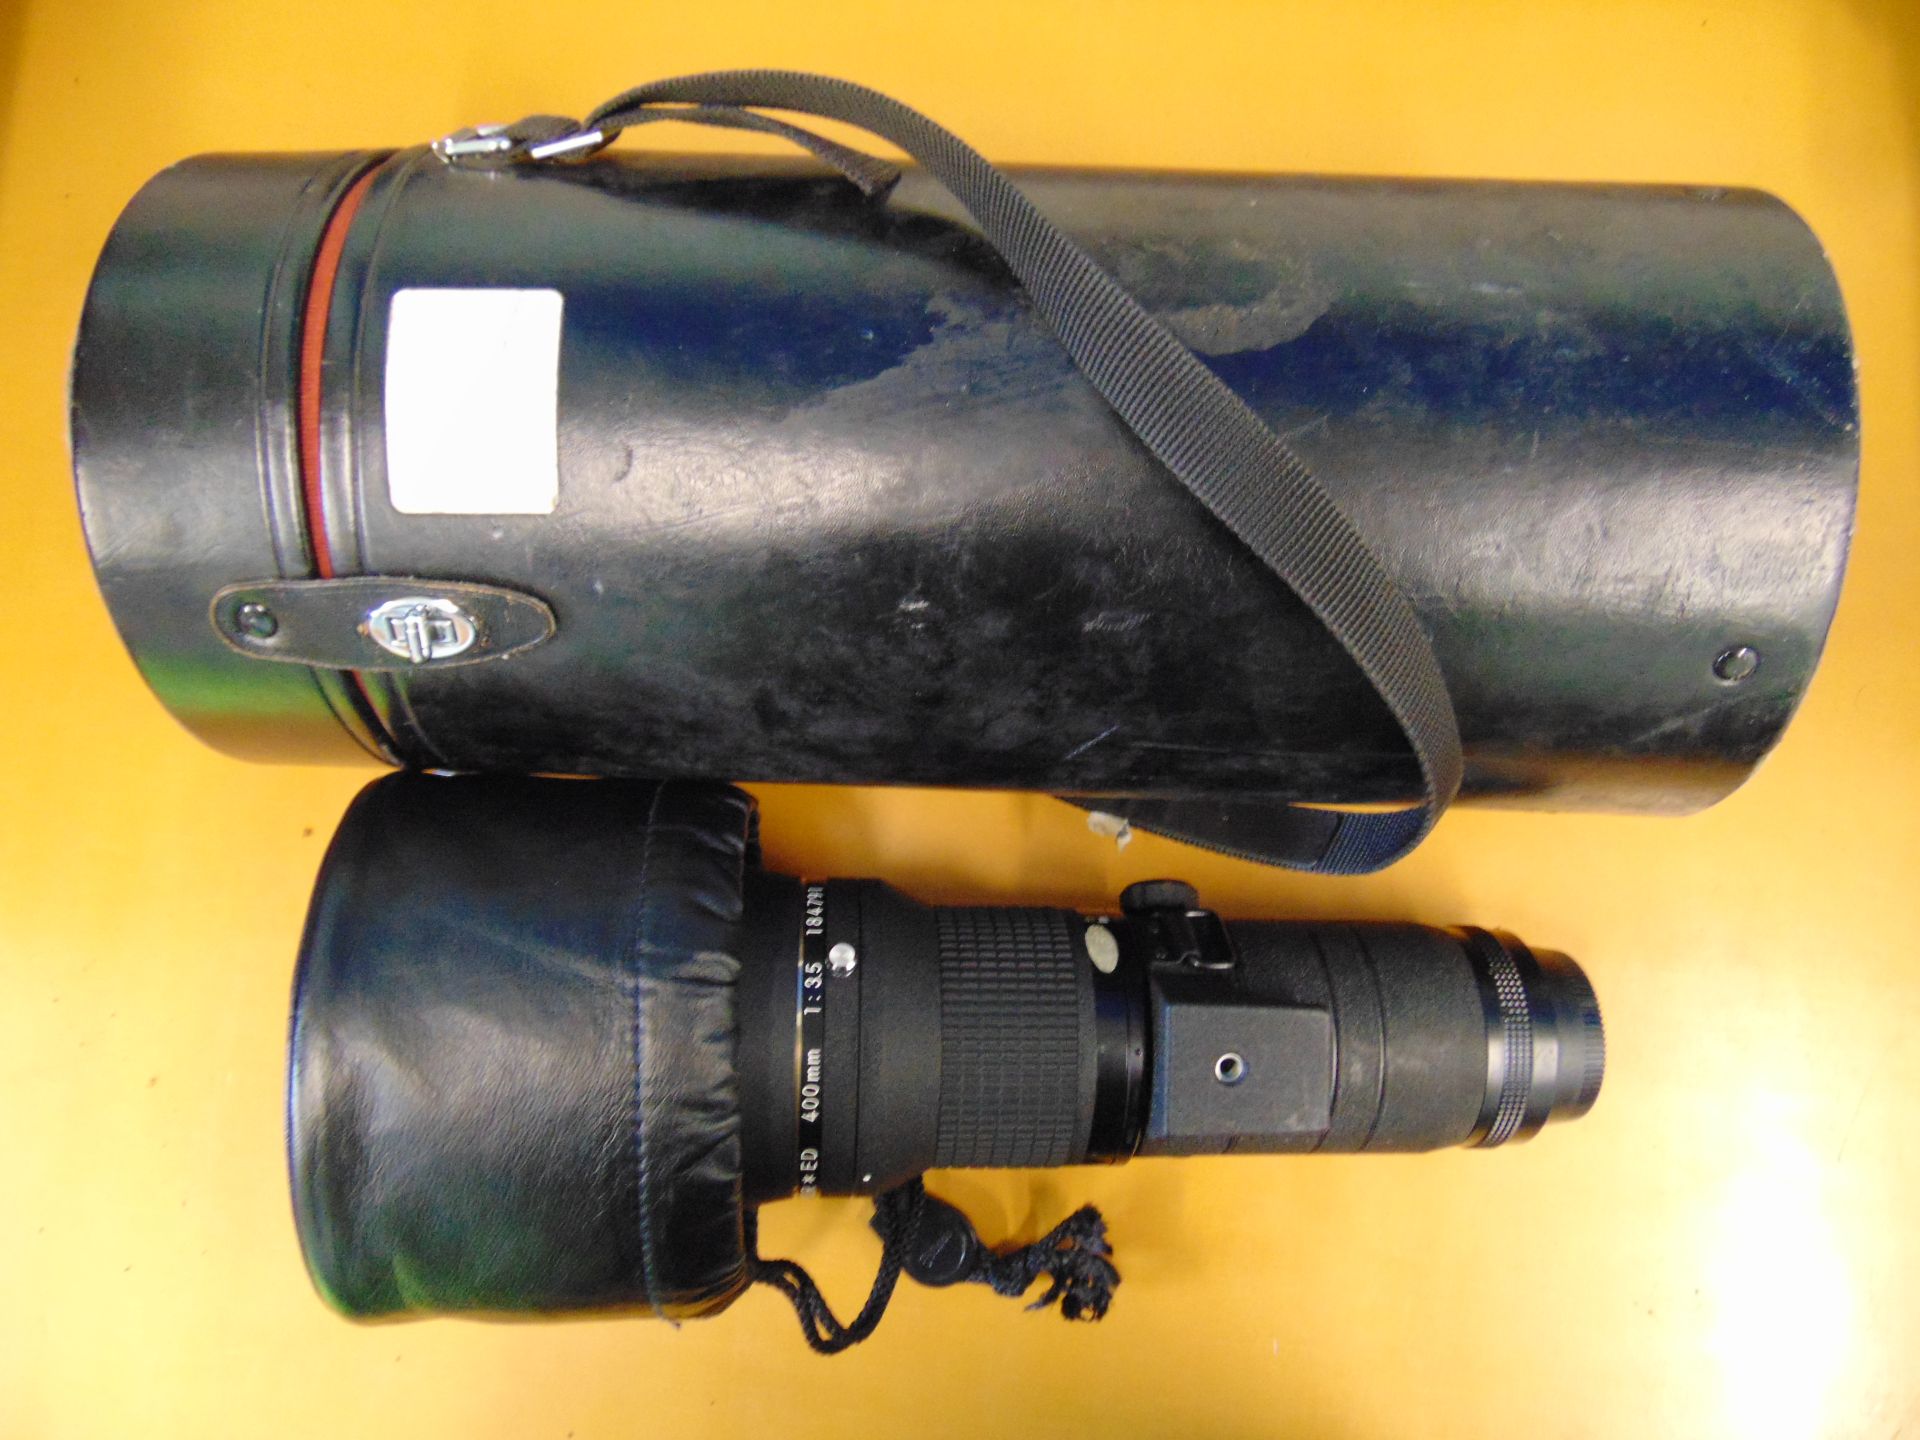 Nikon Nikkor ED 400mm 1:3.5 Lense with Leather Carry Case